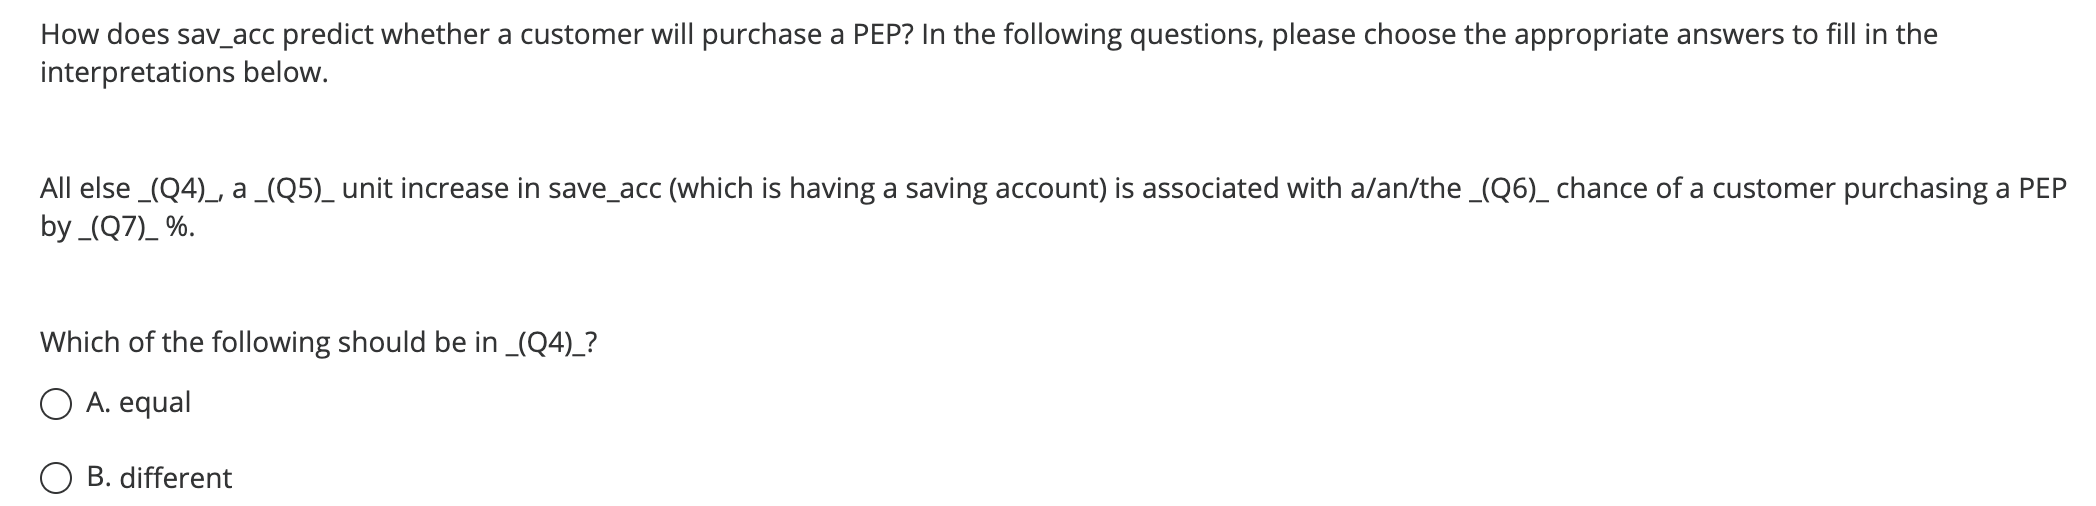 How Does Sav Acc Predict Whether A Customer Will Purchase A Pep In The Following Questions Please Choose The Appropria 1